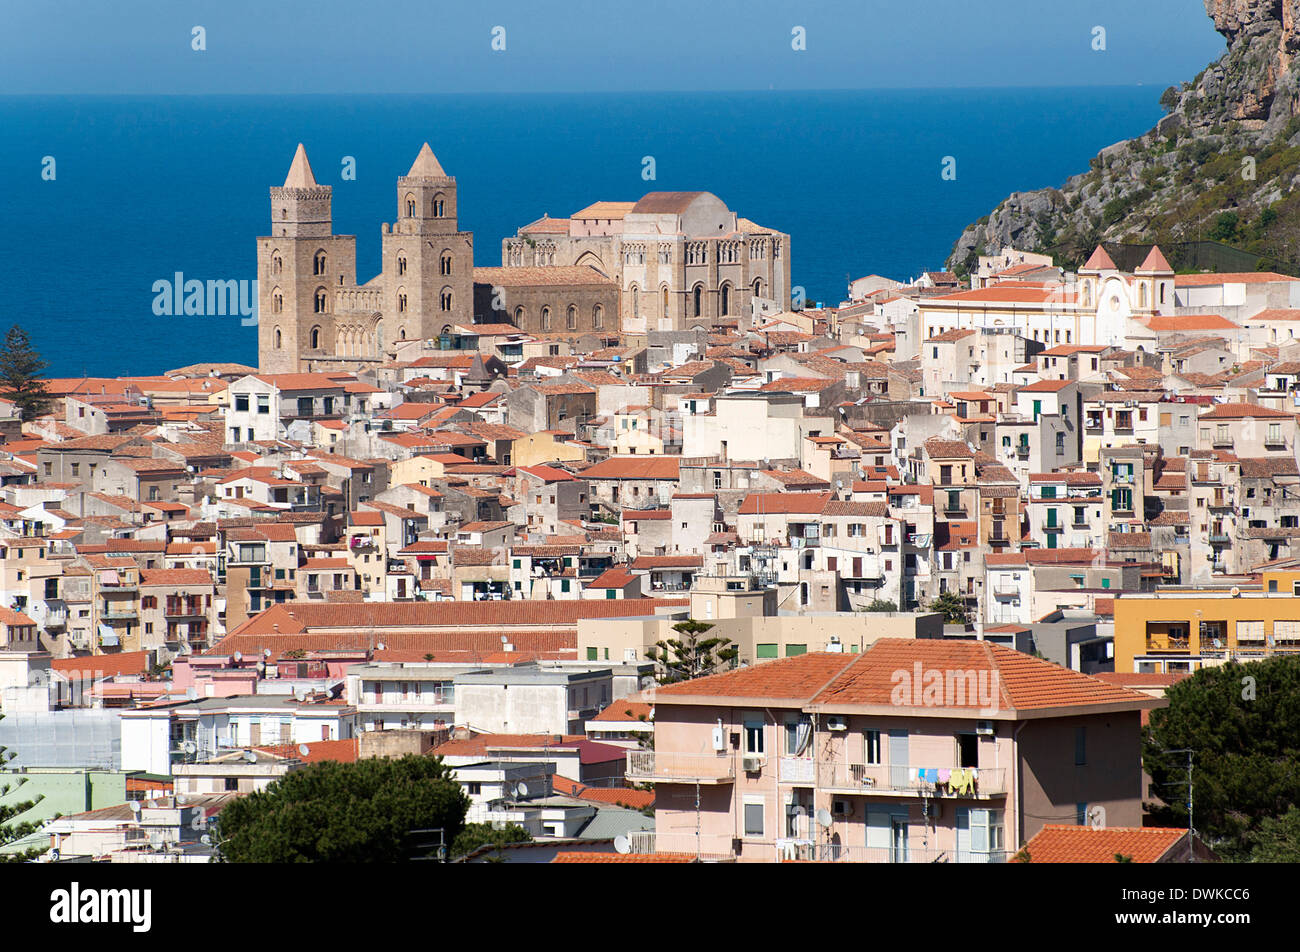 Cathedral, Cefalu Stock Photo